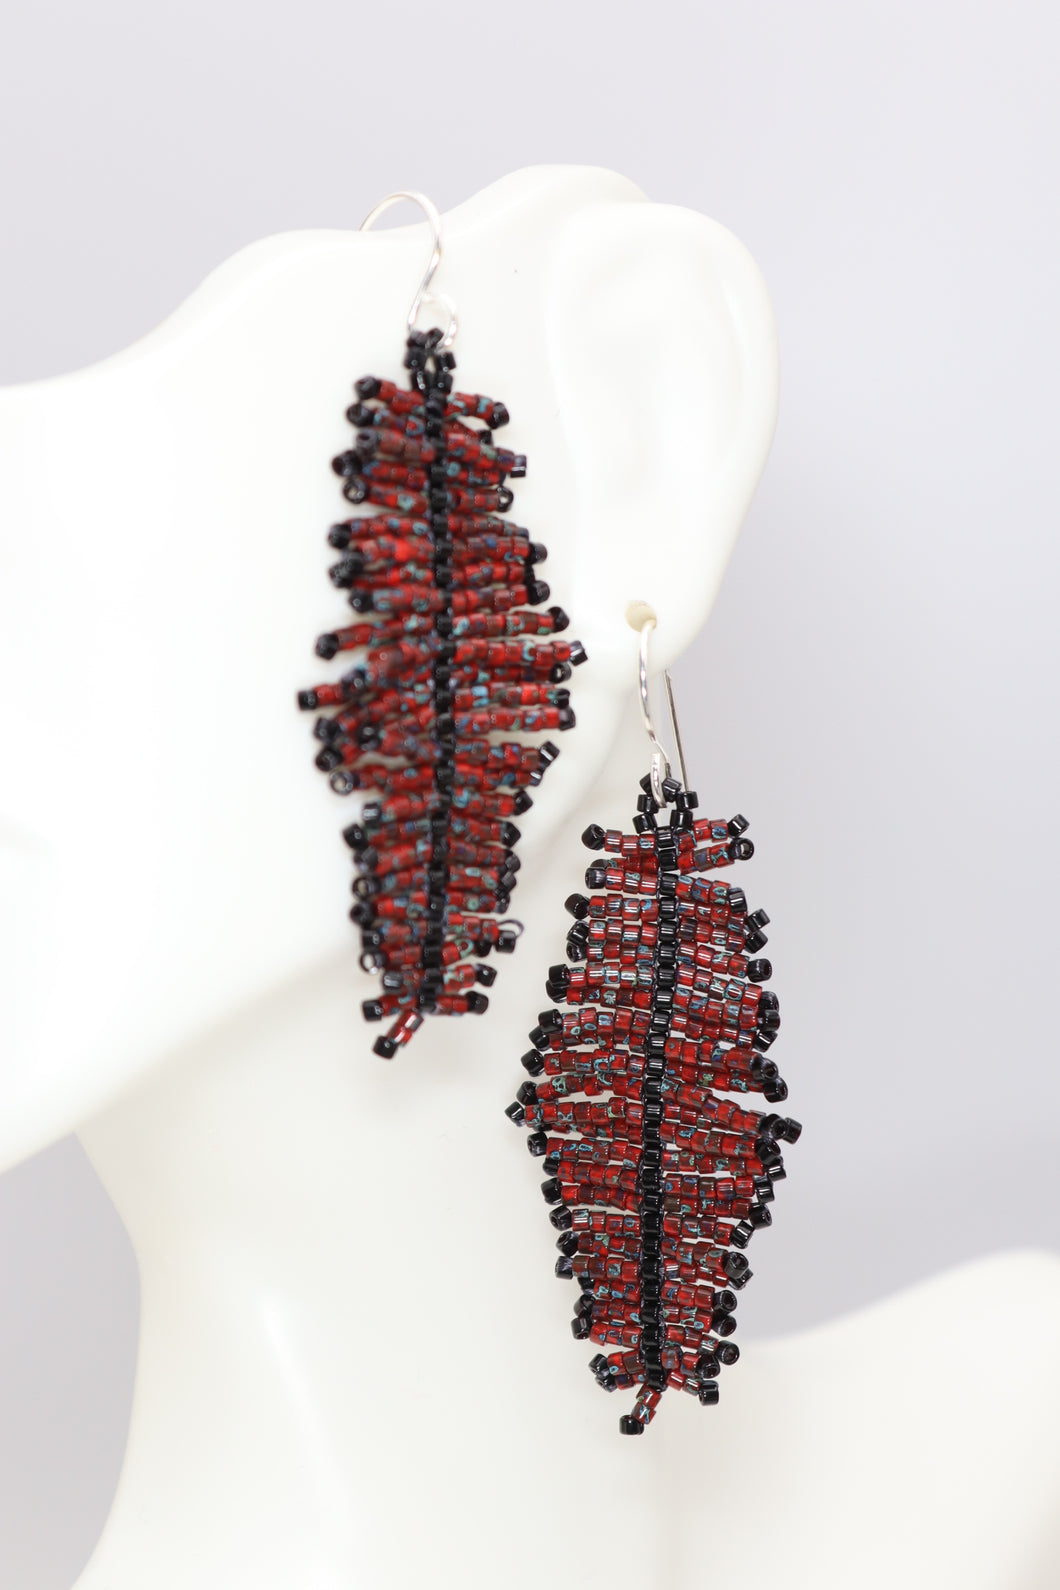 Handmade seed bead feather dangle earrings made from red Picasso seed beads with flecks of gray and turquoise accented with black.  hung on sterling silver wires.  